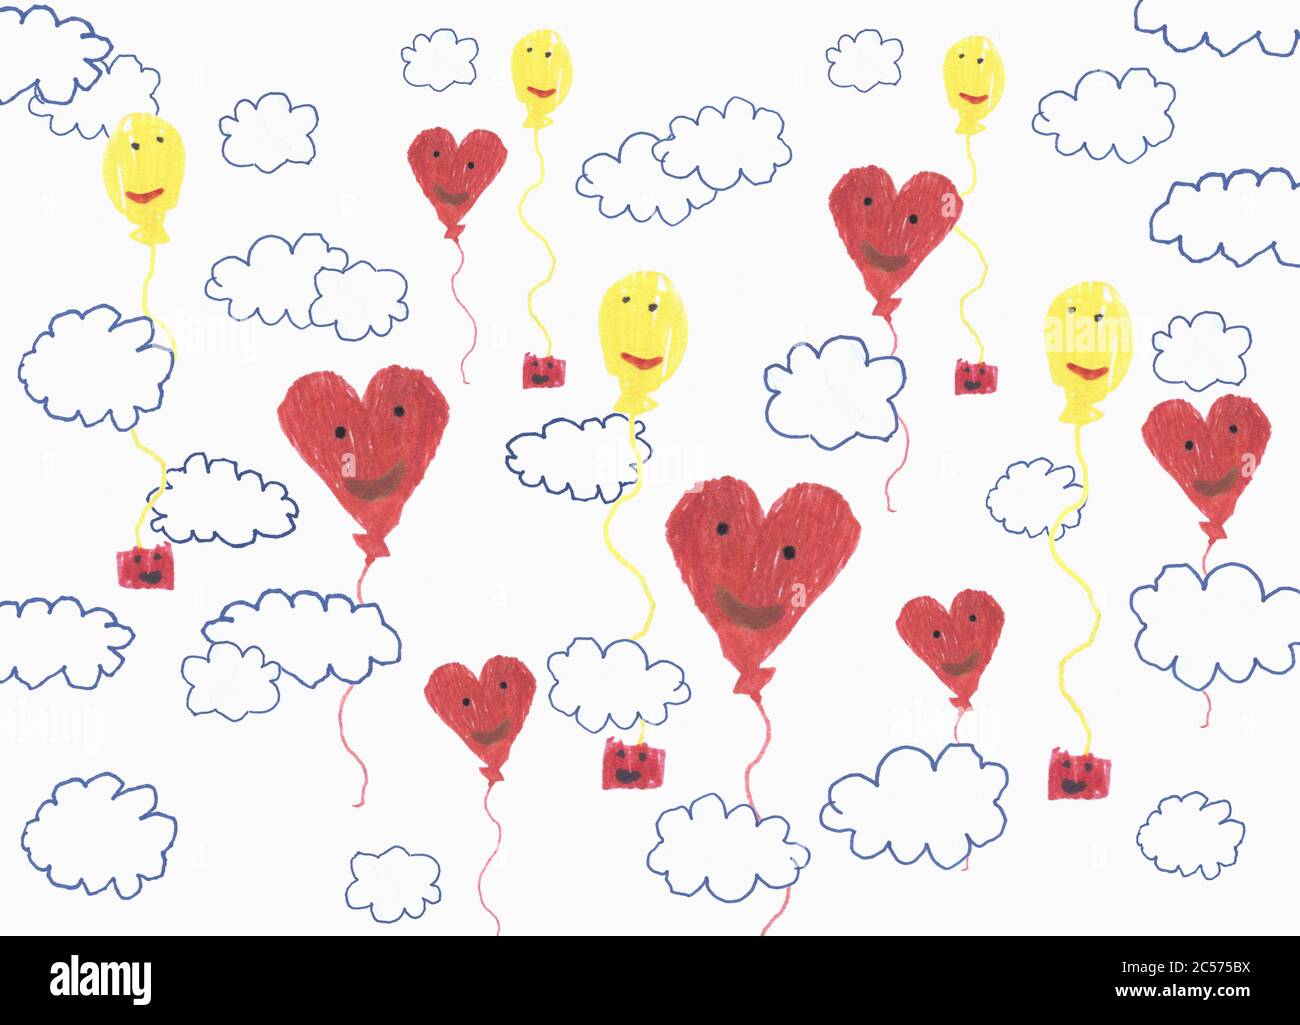 Childs drawing anthropomorphic balloon pattern in cloudy sky Stock Photo